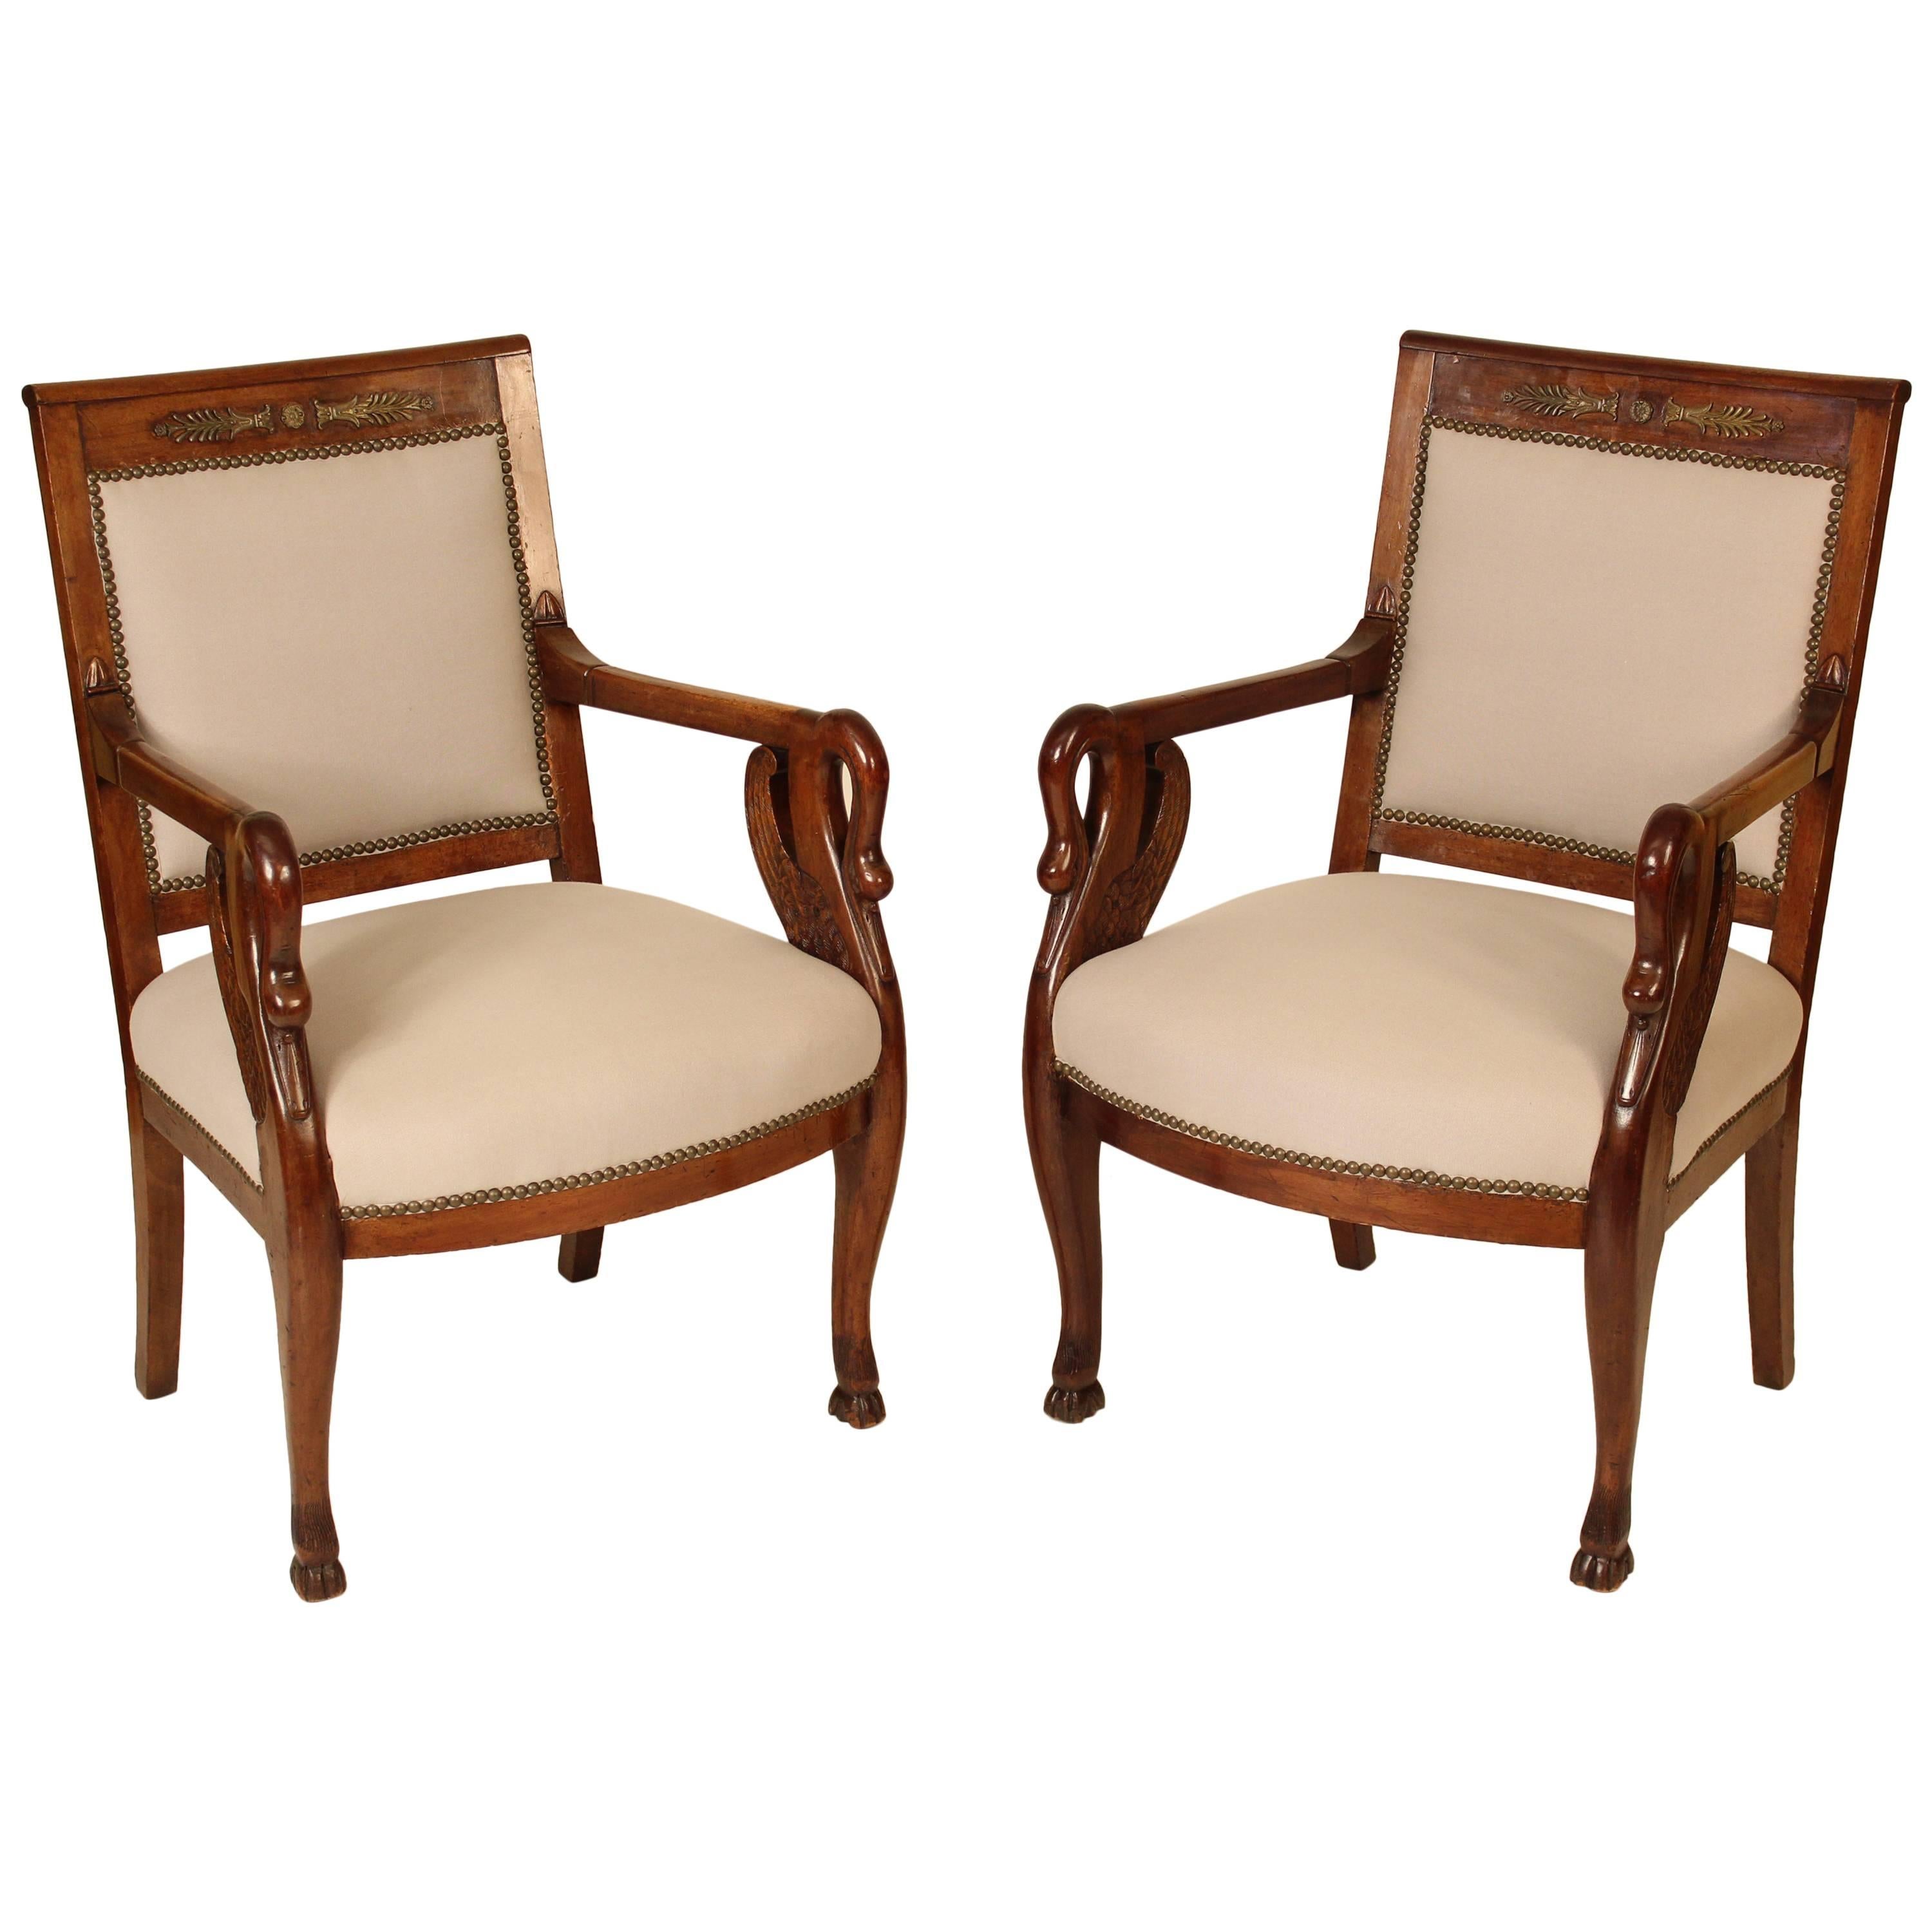 Pair of Empire Style Swan Carved Armchairs